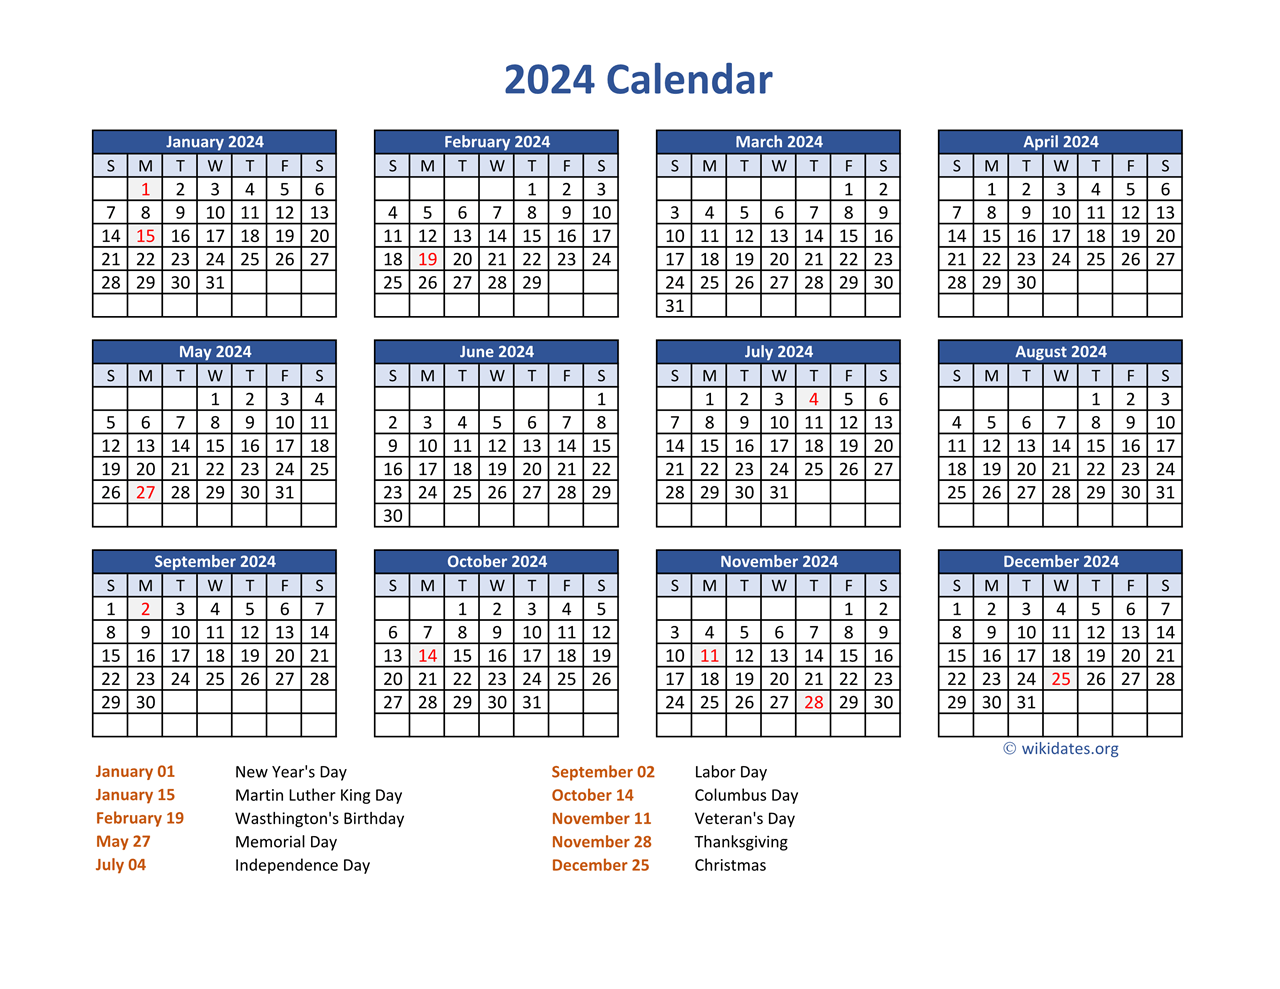 Pdf Calendar 2024 With Federal Holidays | Wikidates for Printable 2024 Yearly Calendar With Holidays